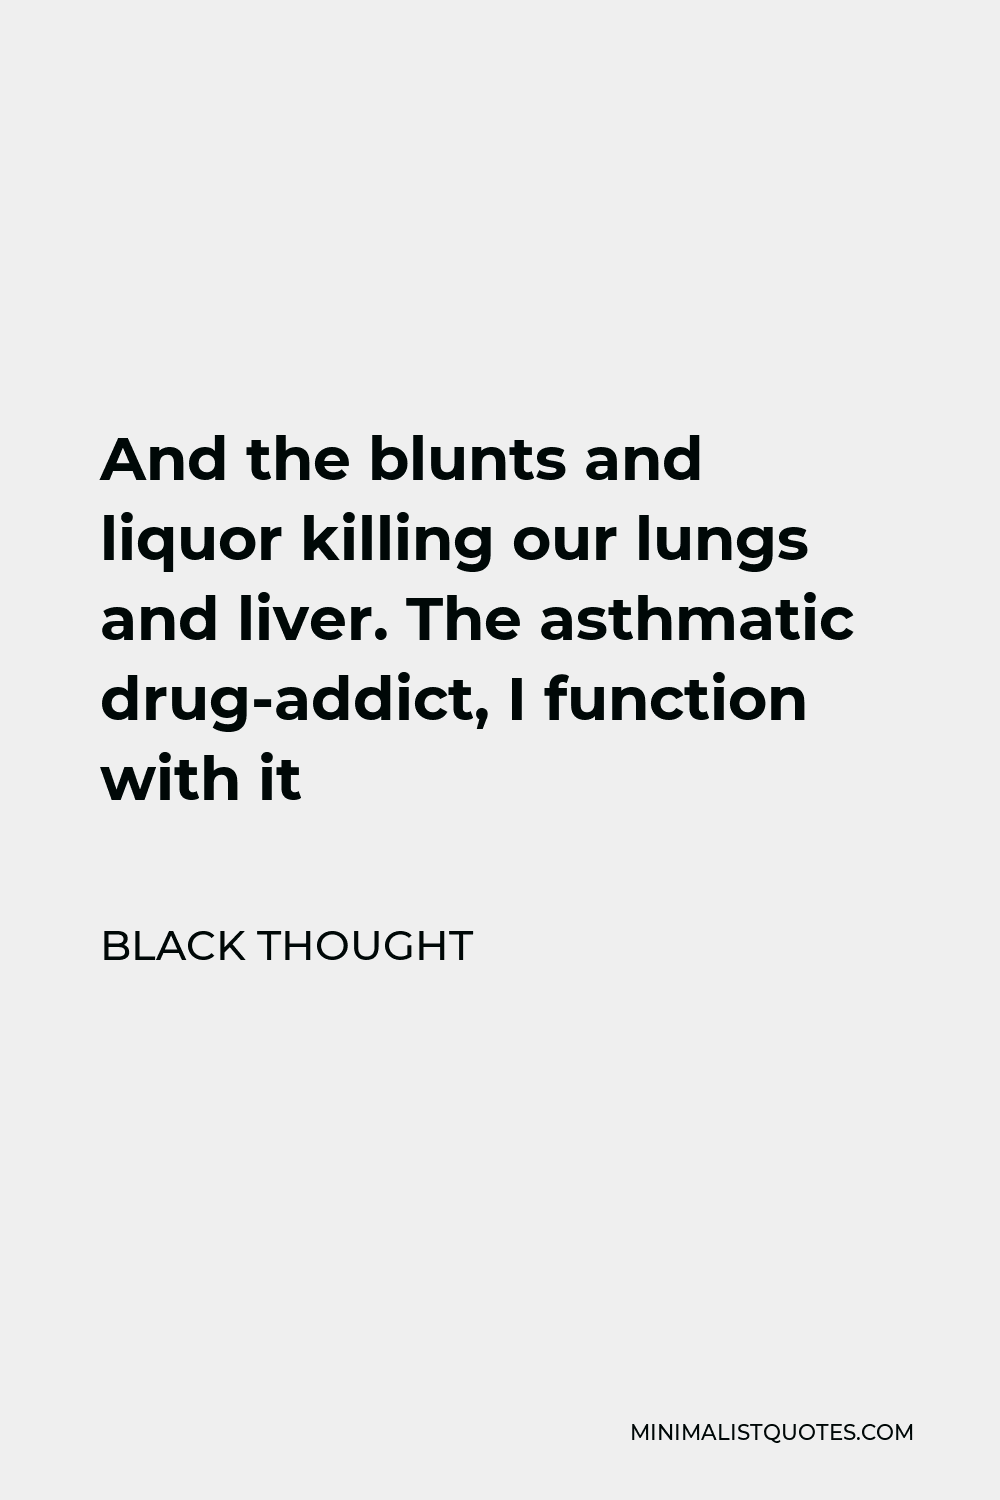 Black Thought Quote - And the blunts and liquor killing our lungs and liver. The asthmatic drug-addict, I function with it